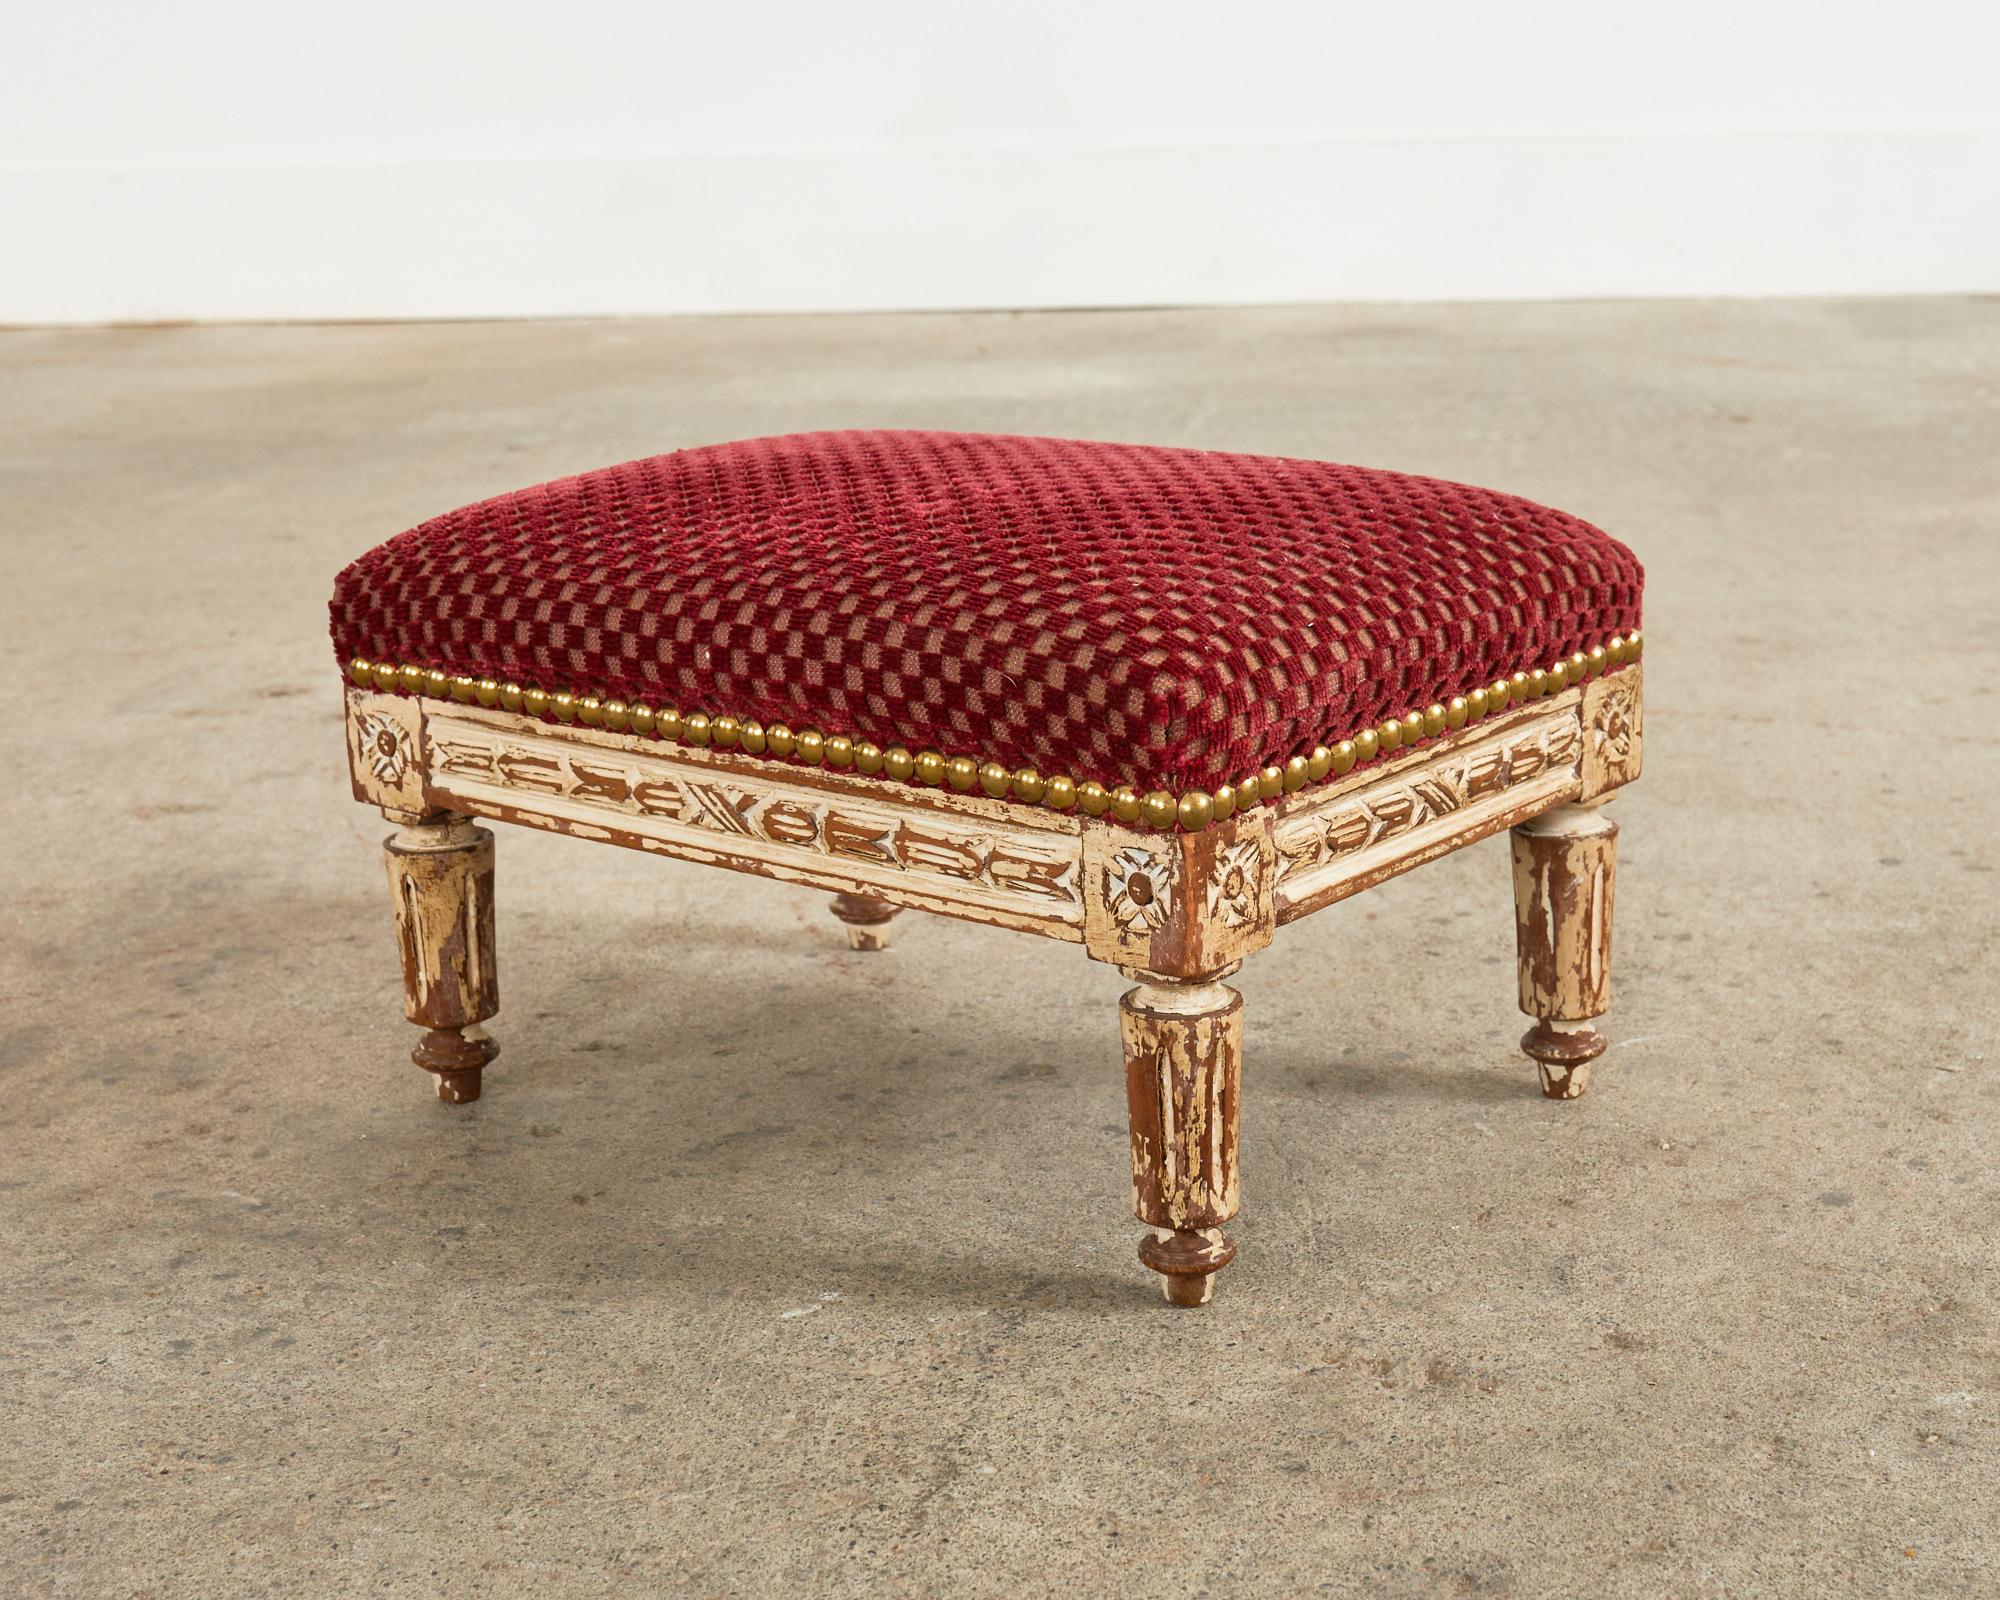 19th Century French Louis XVI Diminutive Painted Mahogany Footstool For Sale 3